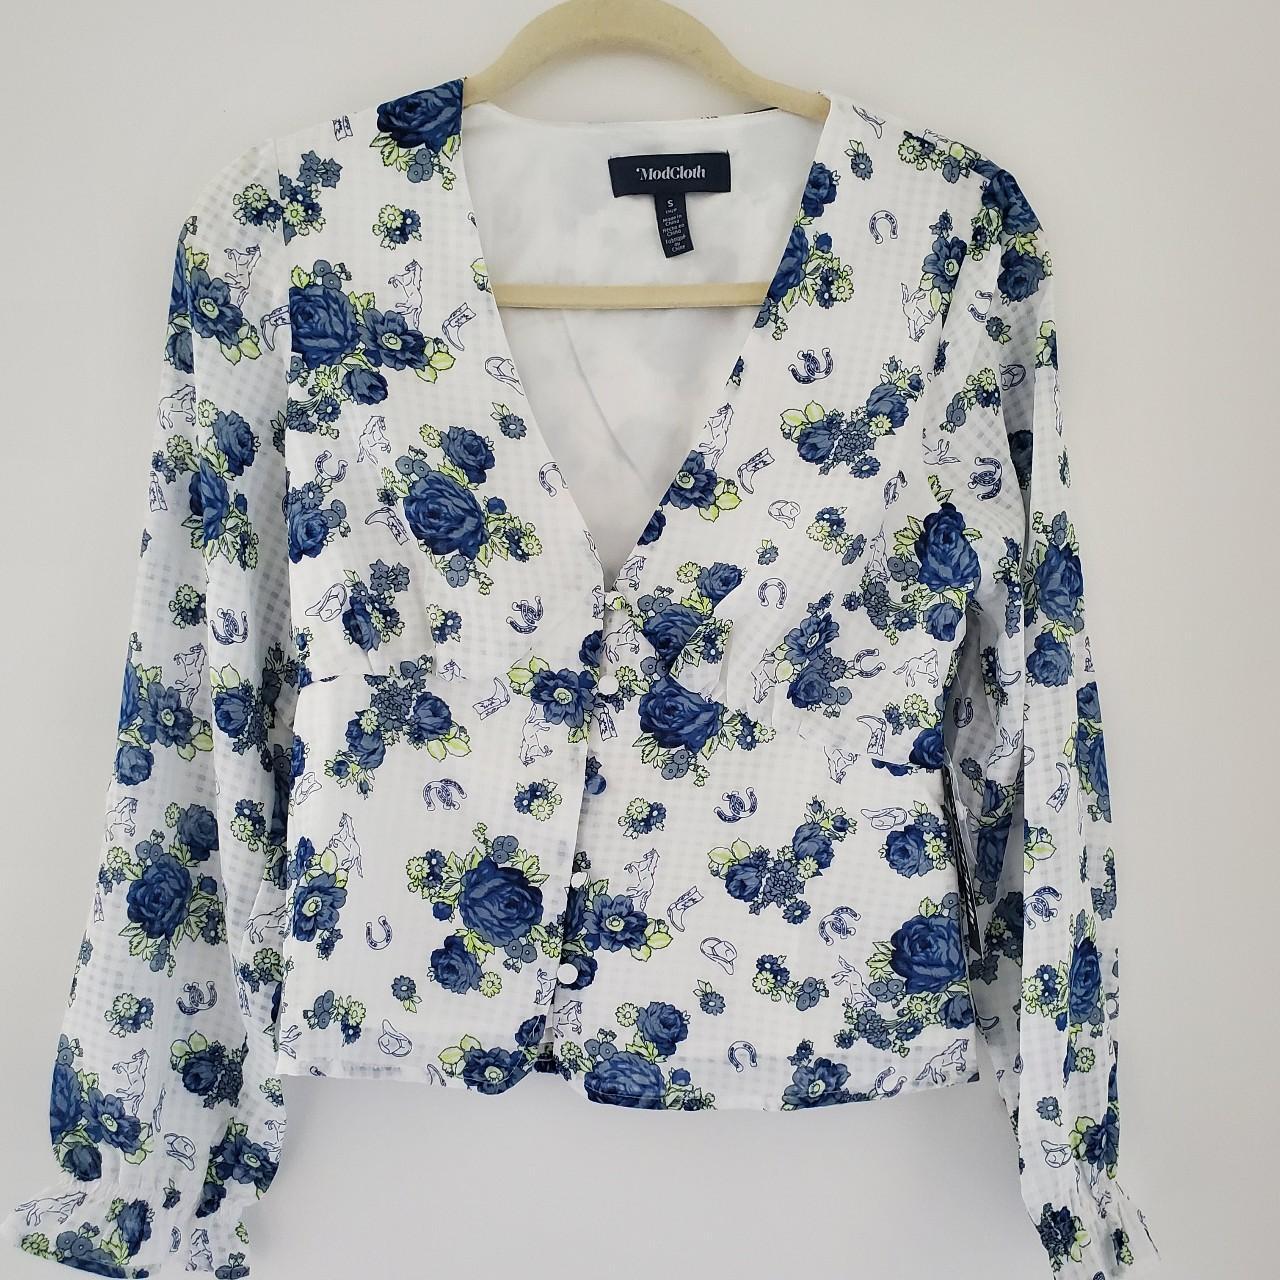 ModCloth Women's White and Blue Blouse | Depop